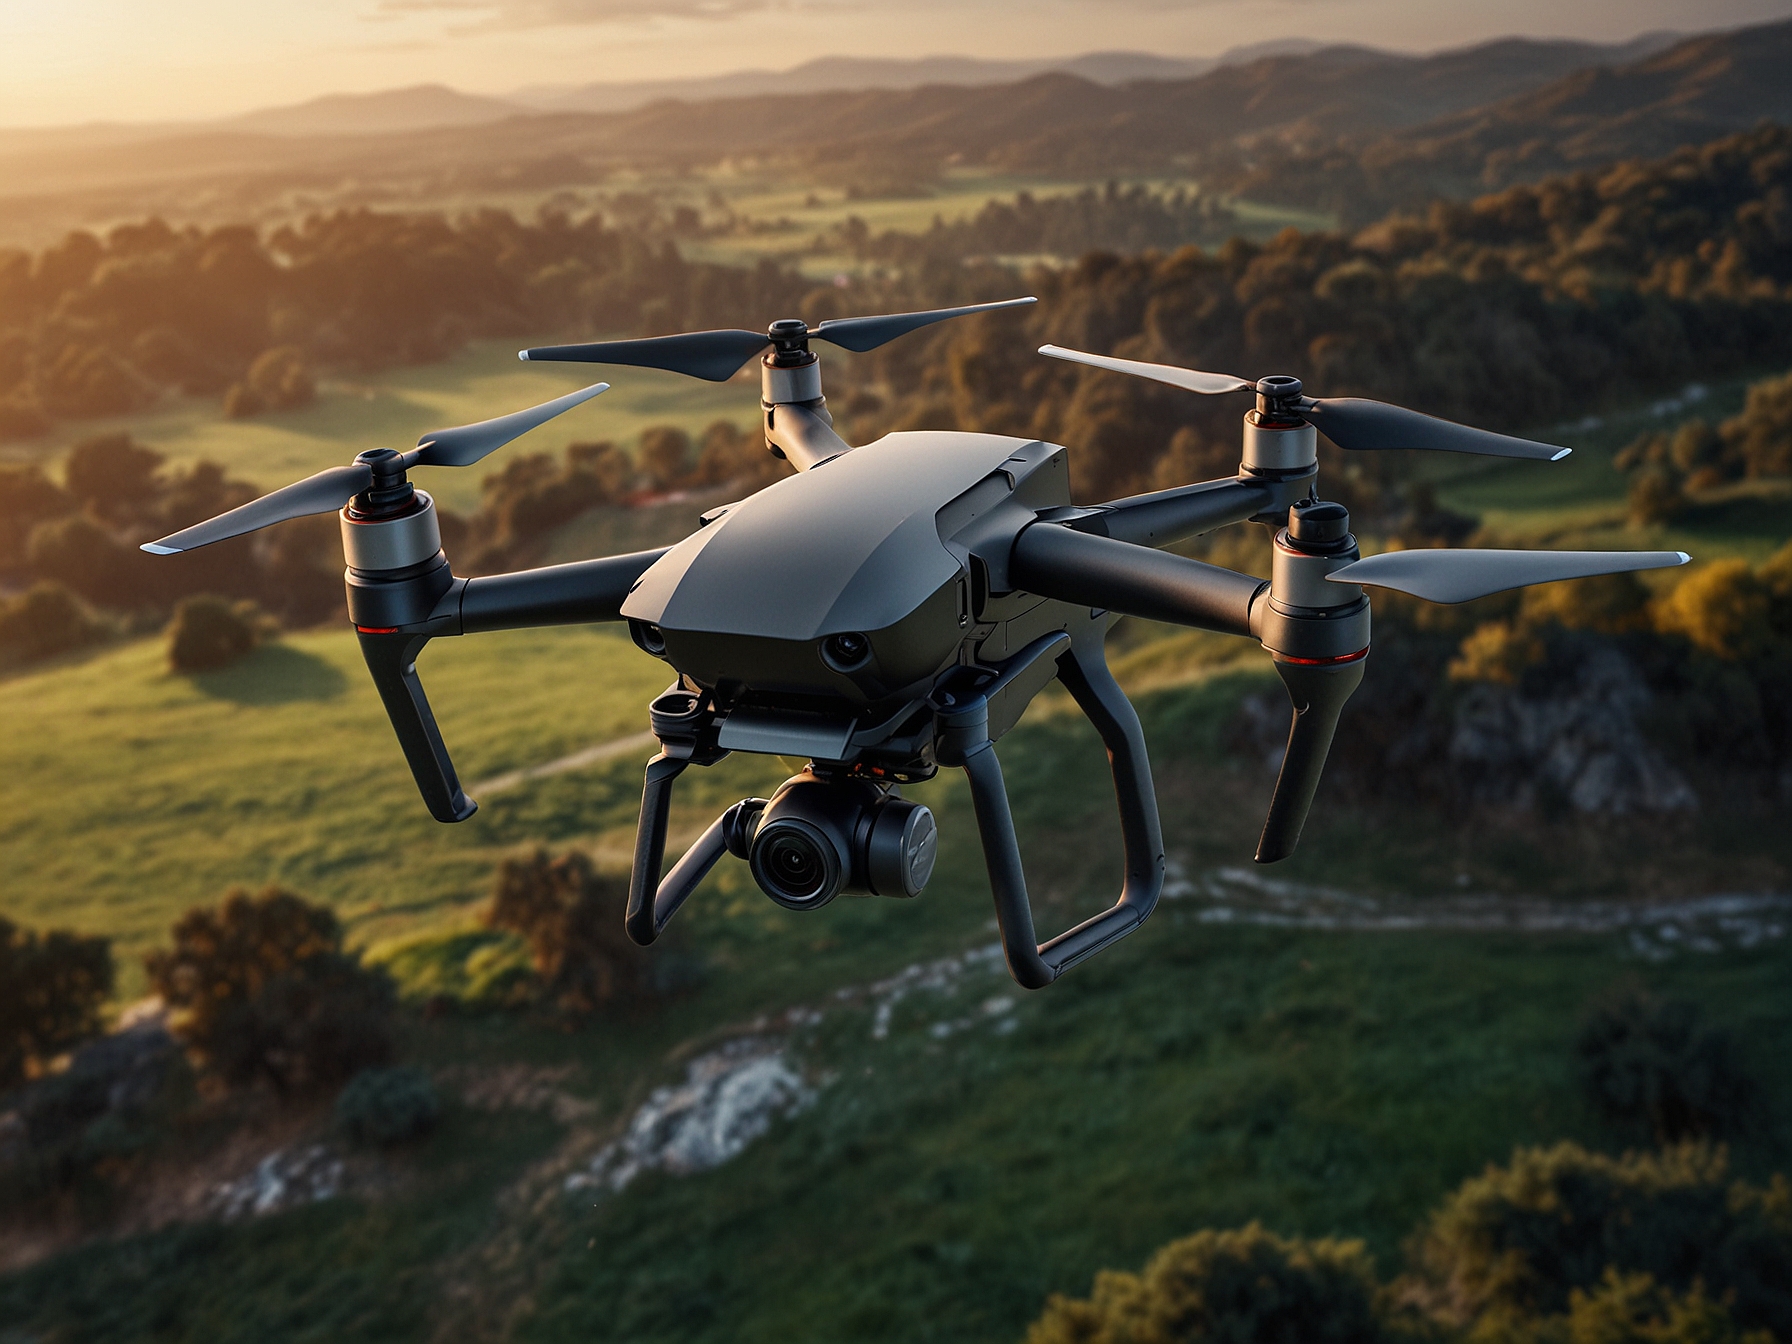 An image depicting a DJI drone flying over a scenic landscape, highlighting the advanced features and widespread use of DJI drones in photography and videography.